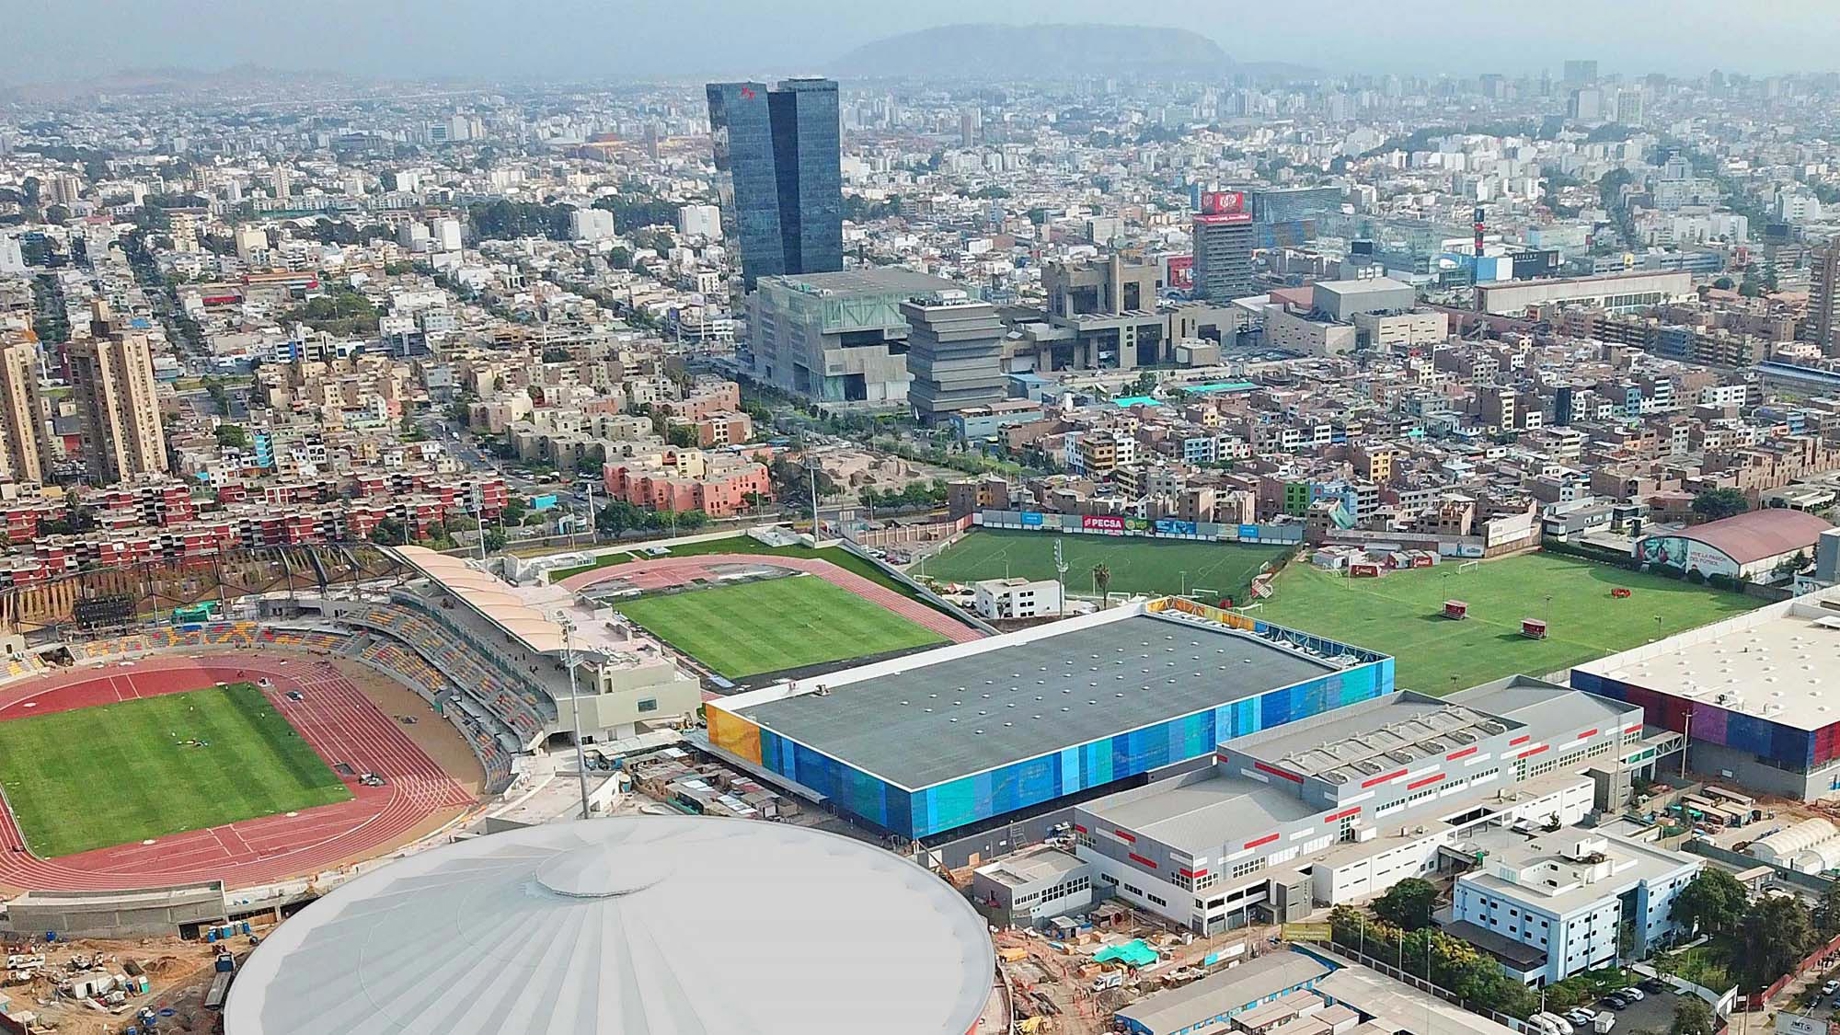 Aerial view of the 2019 Lima Games site